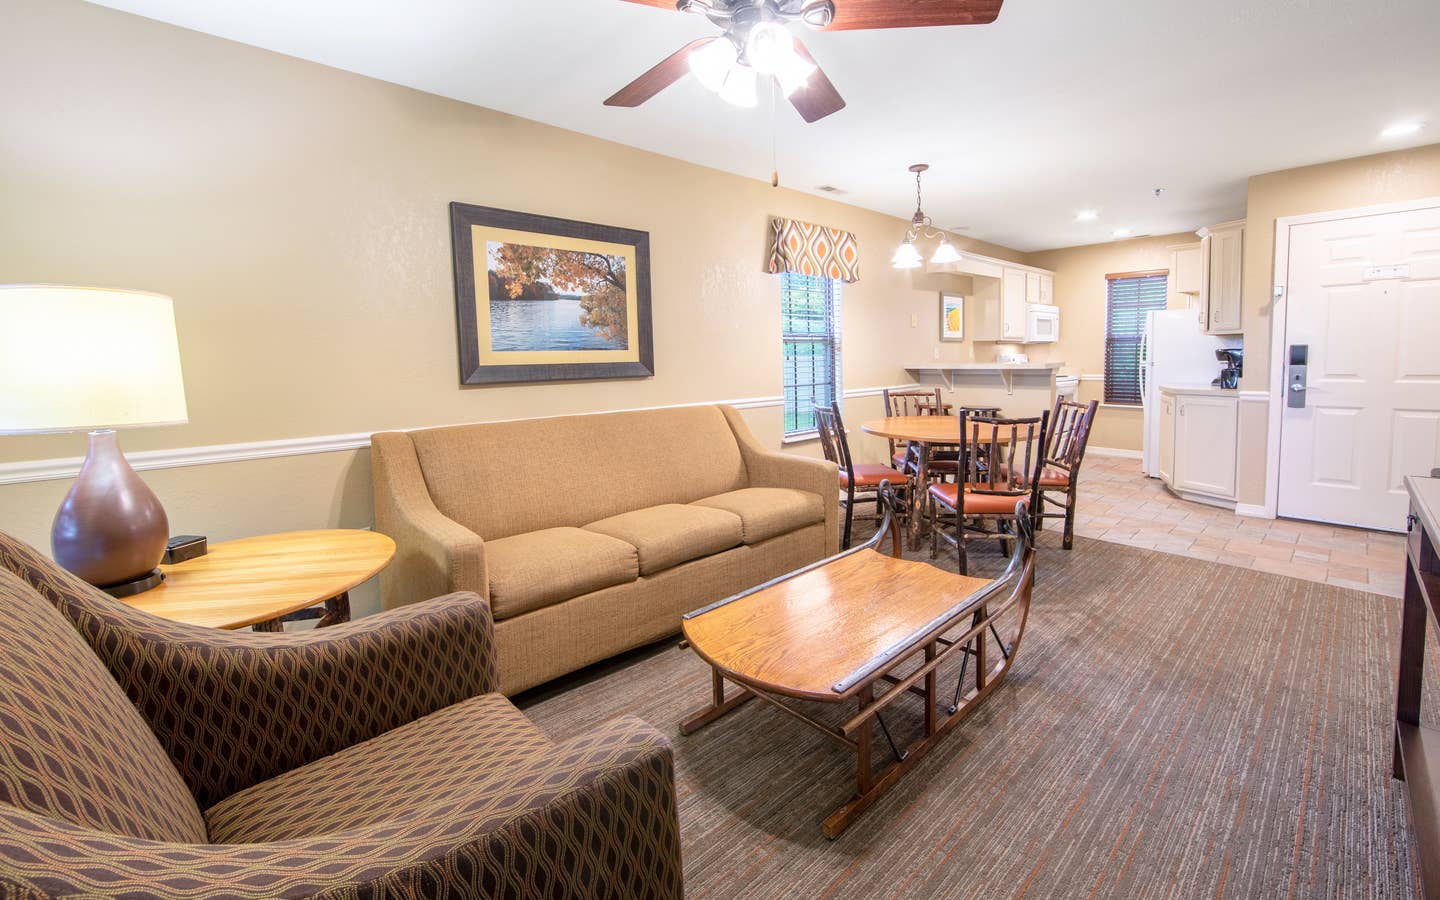 Living room, dining and kitchen area in a two-bedroom lodge villa at Fox River Resort in Sheridan, Illinois.